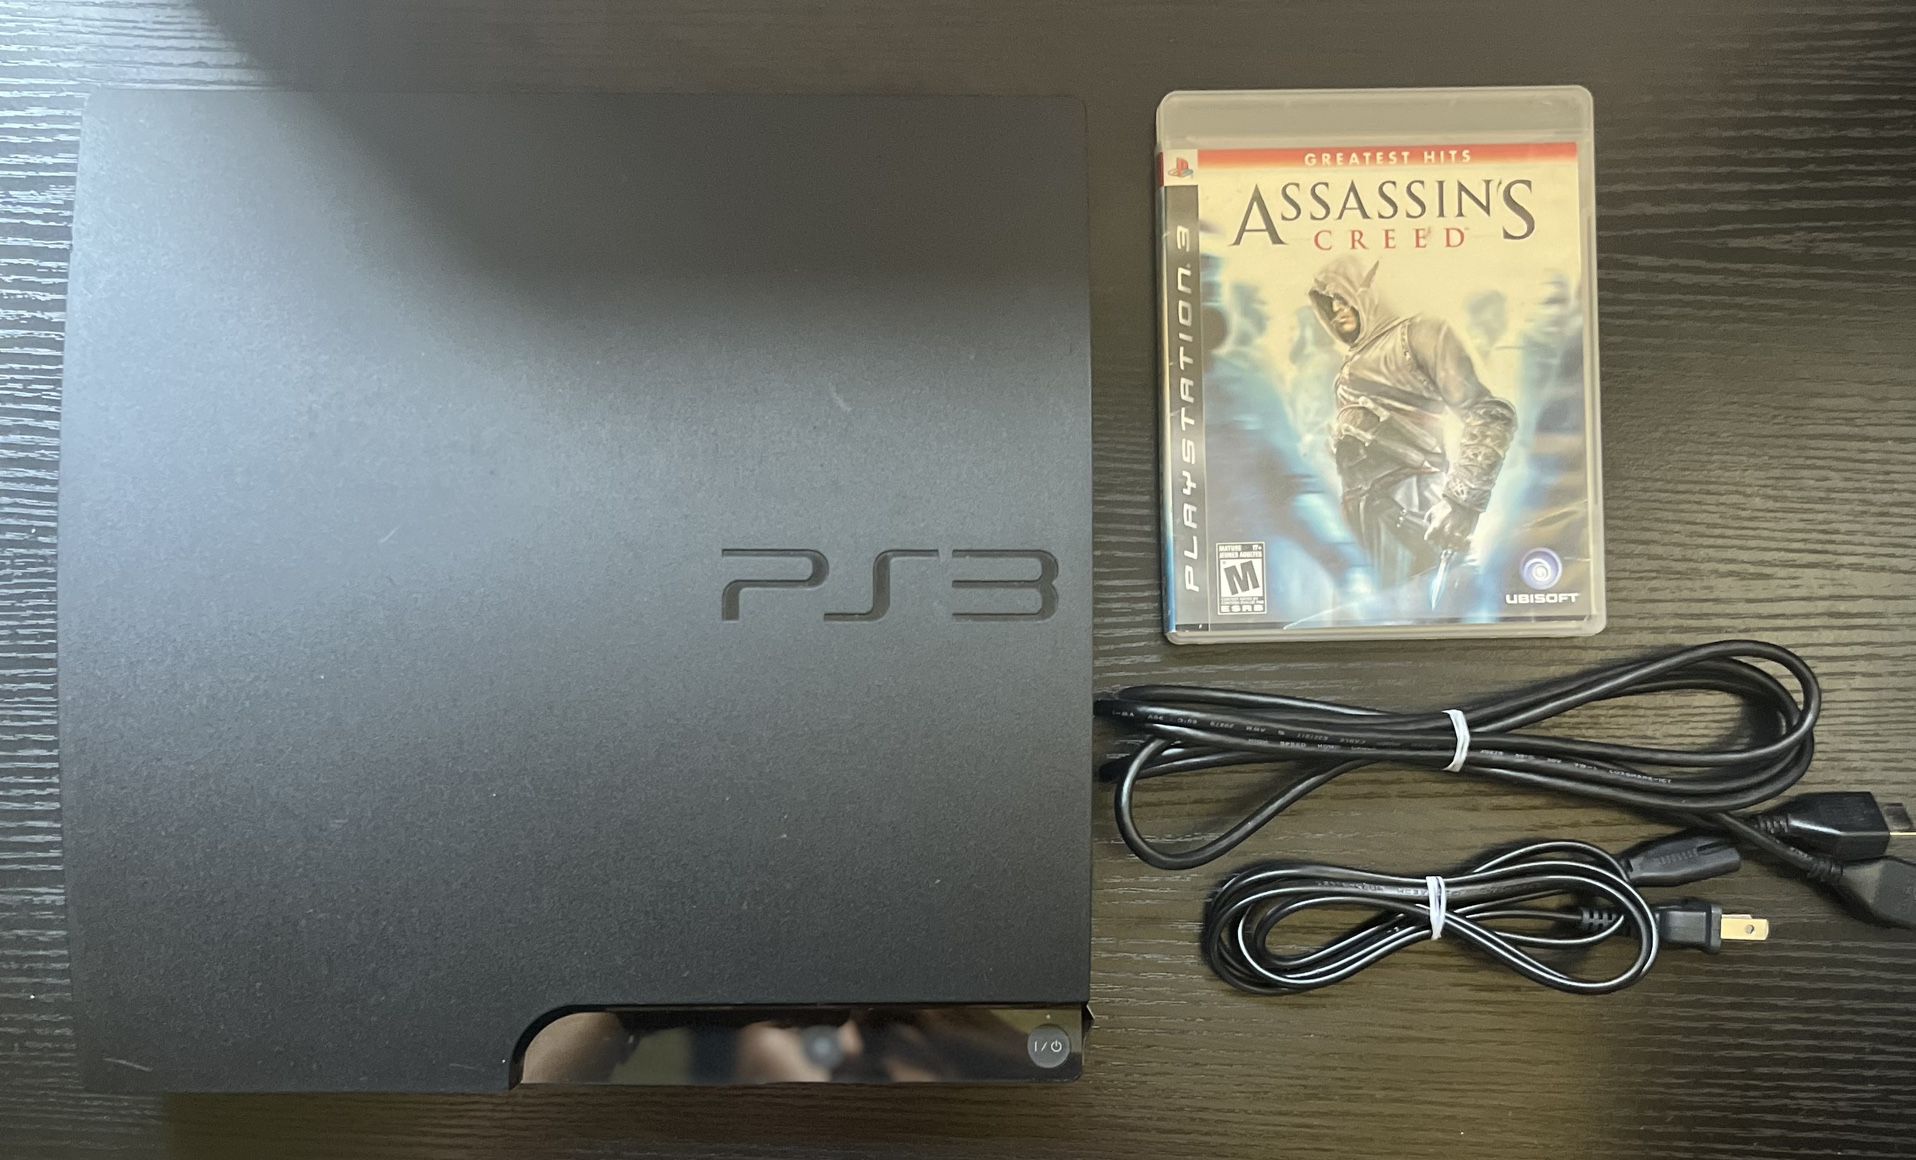 PS3 SLIM + ASSASSIN’S CREED 